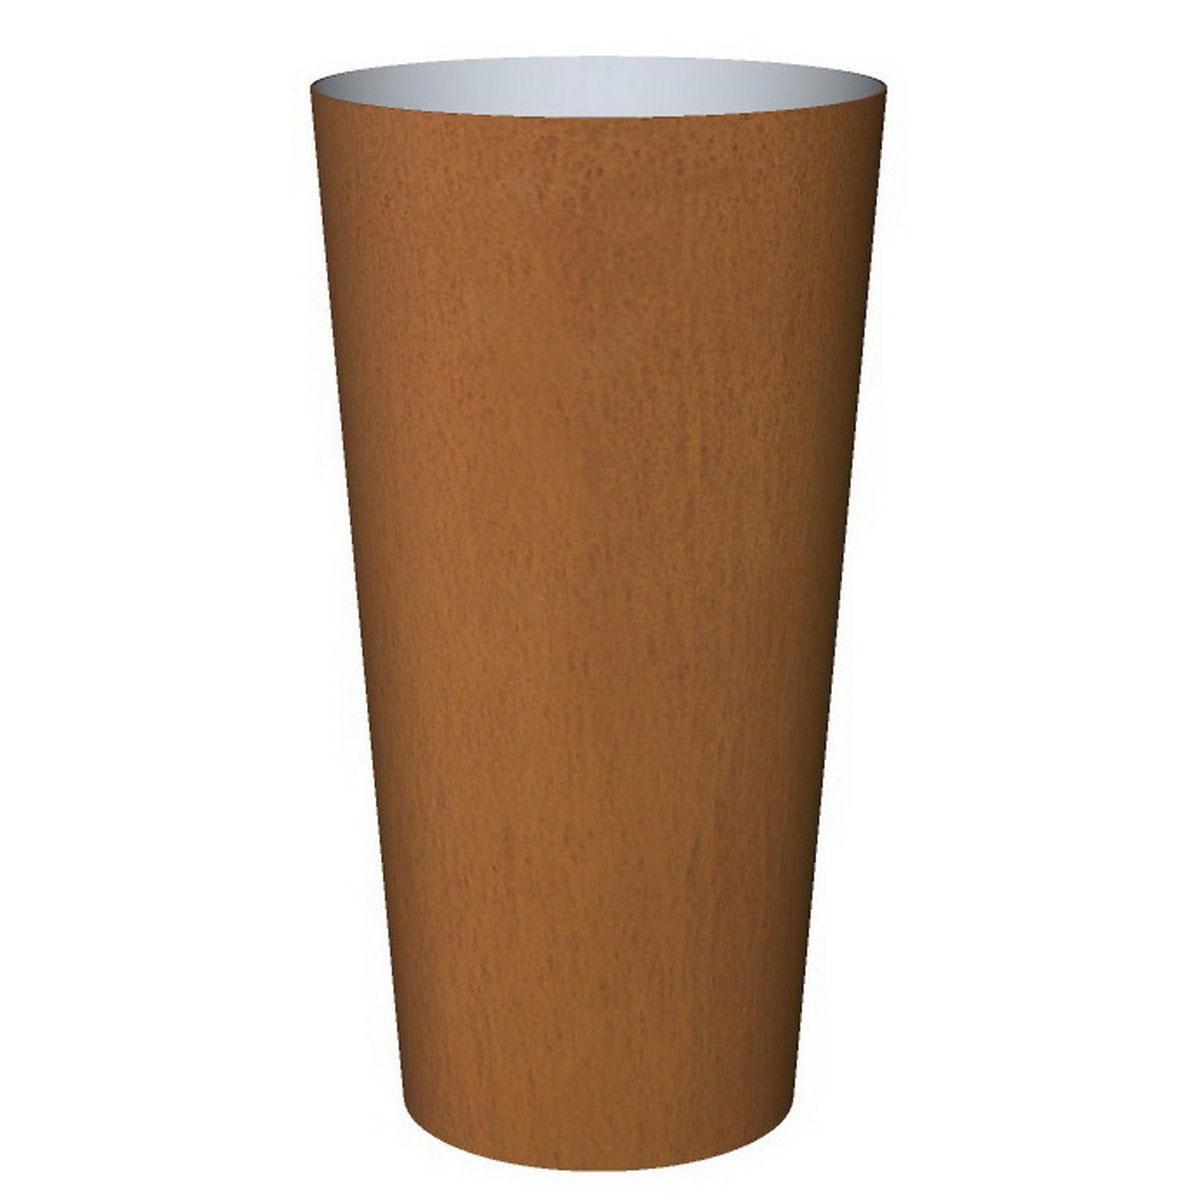 Cortenstyle Basic Conica Tall Planter IN\OUT